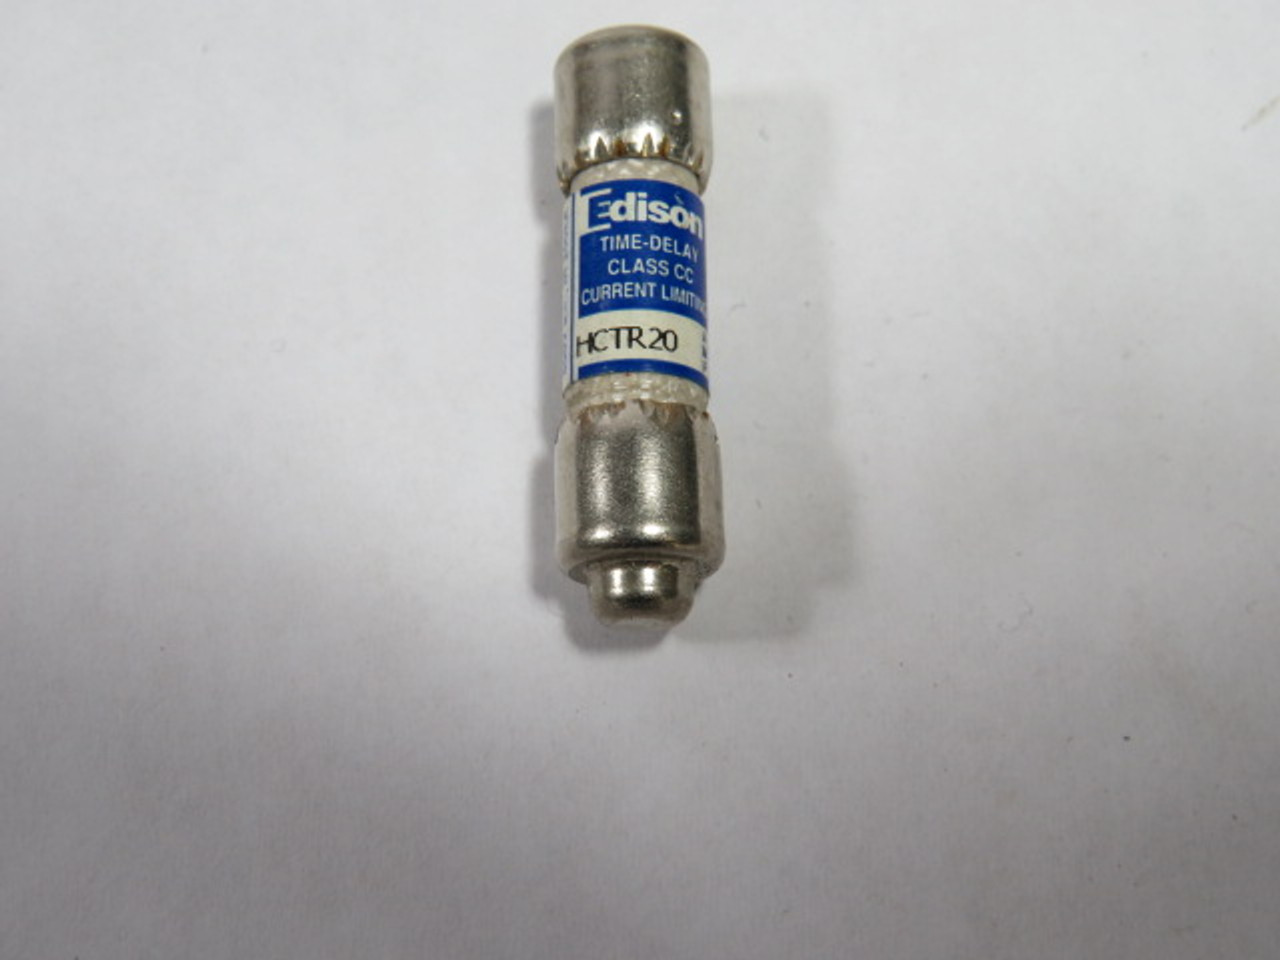 Edison HCTR20 Time Delay Fuse 20A 600V USED